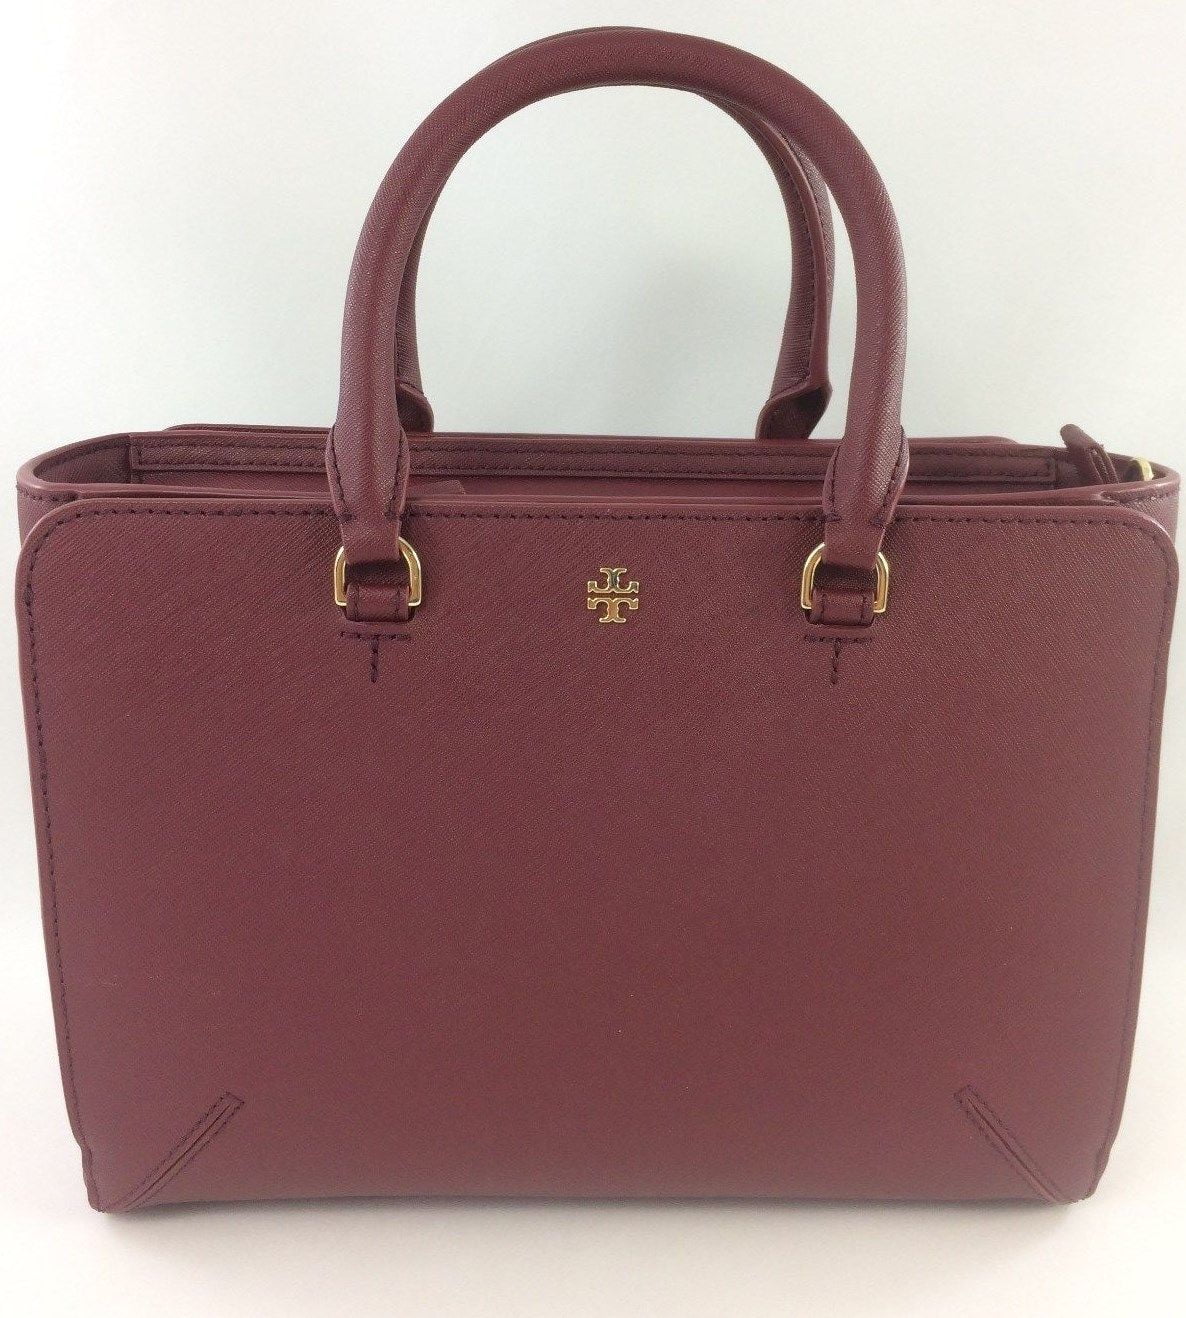 Tory Burch Emerson Small Zip Tote Leather Shoulder Handbag In Imperial  Garnet